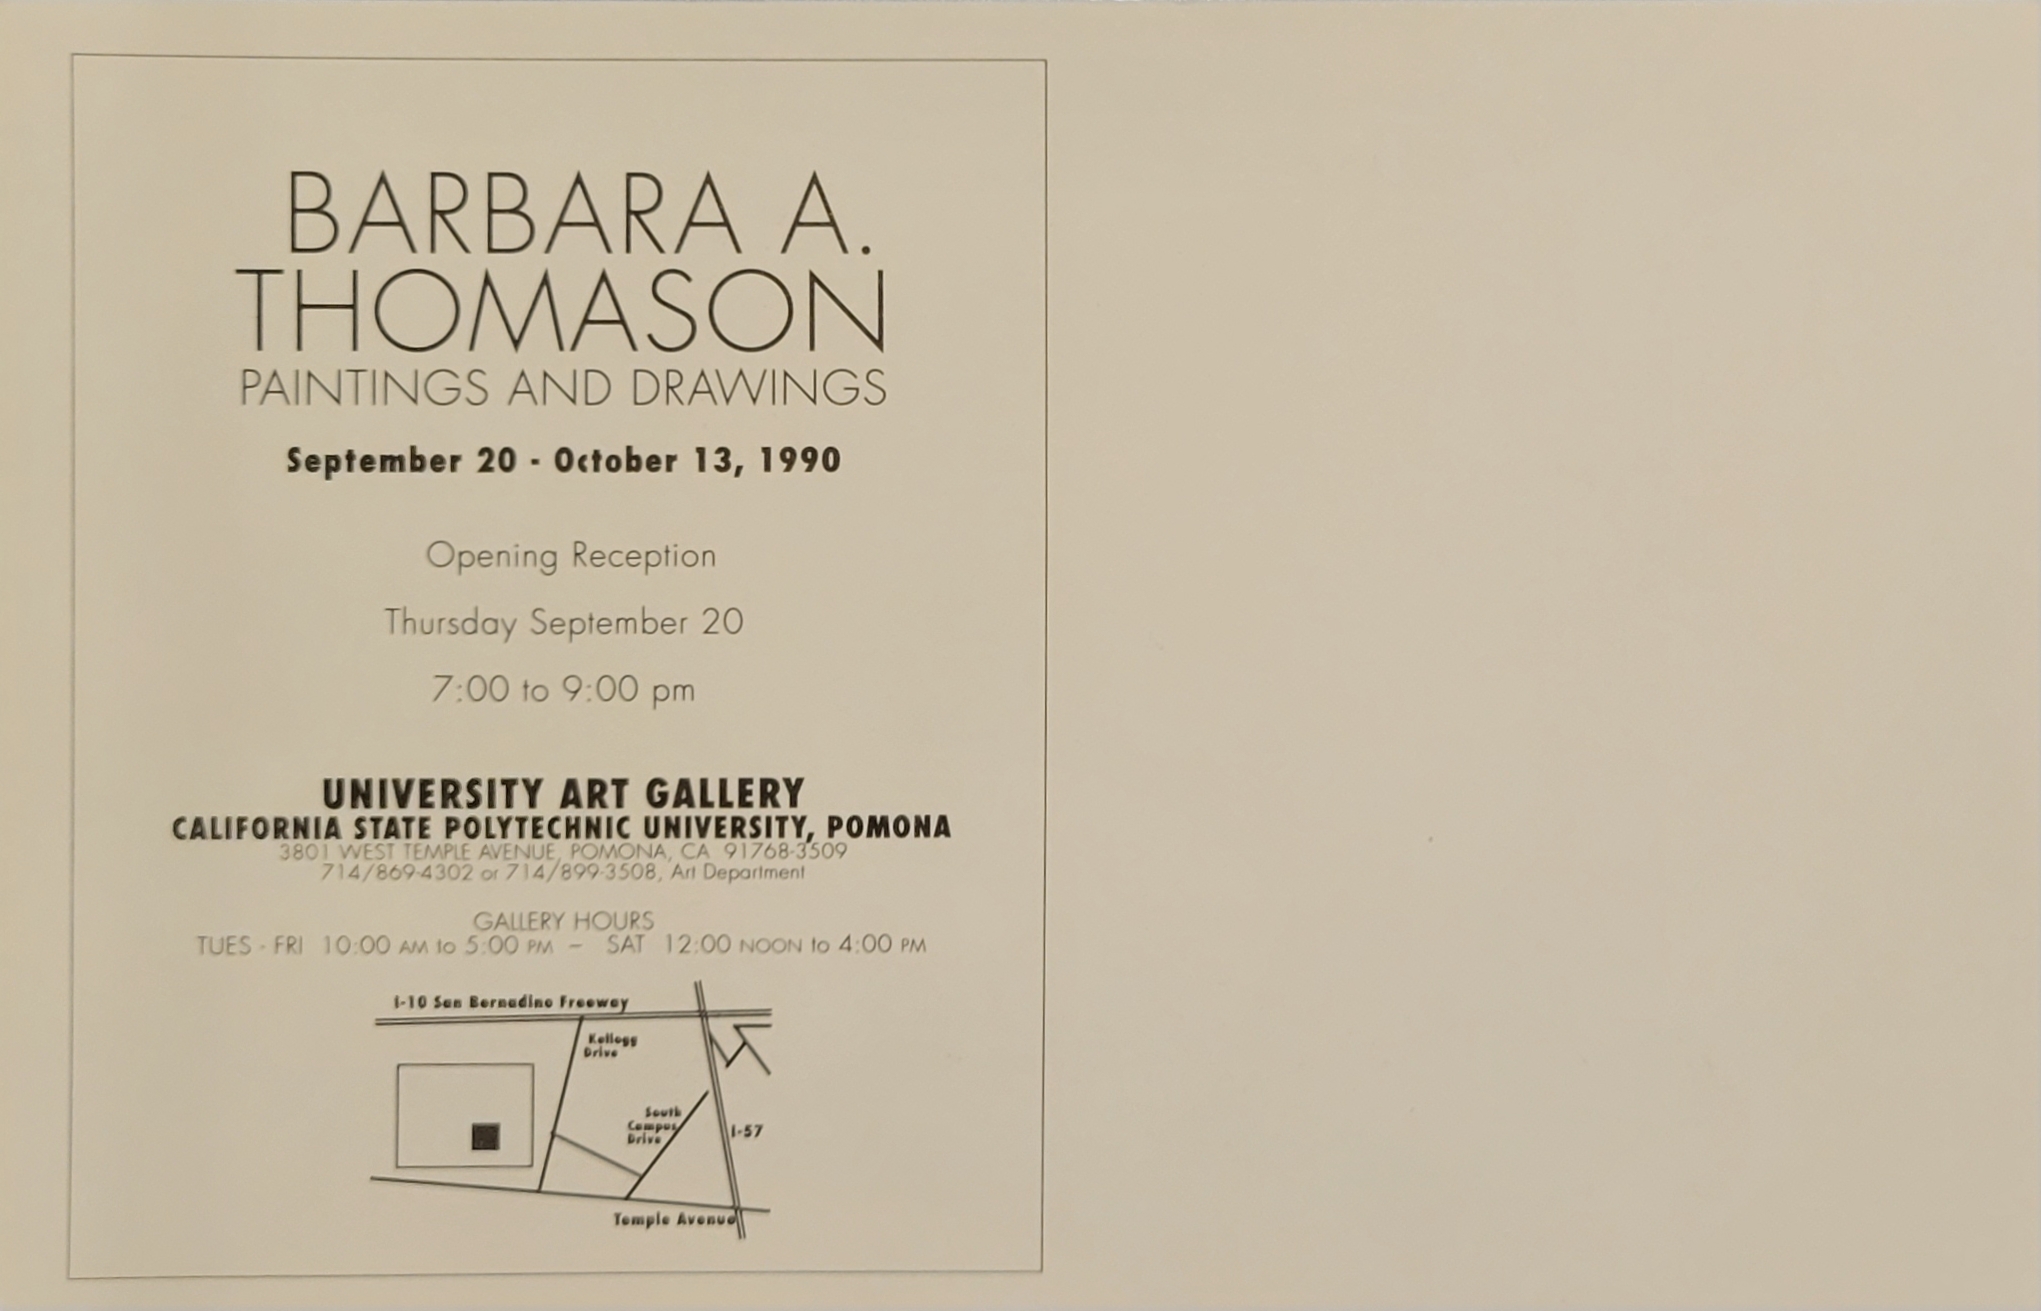 The Barbara A. Thomason Paintings and Drawings exhibition will be open from September 20 to October 13, 1990.